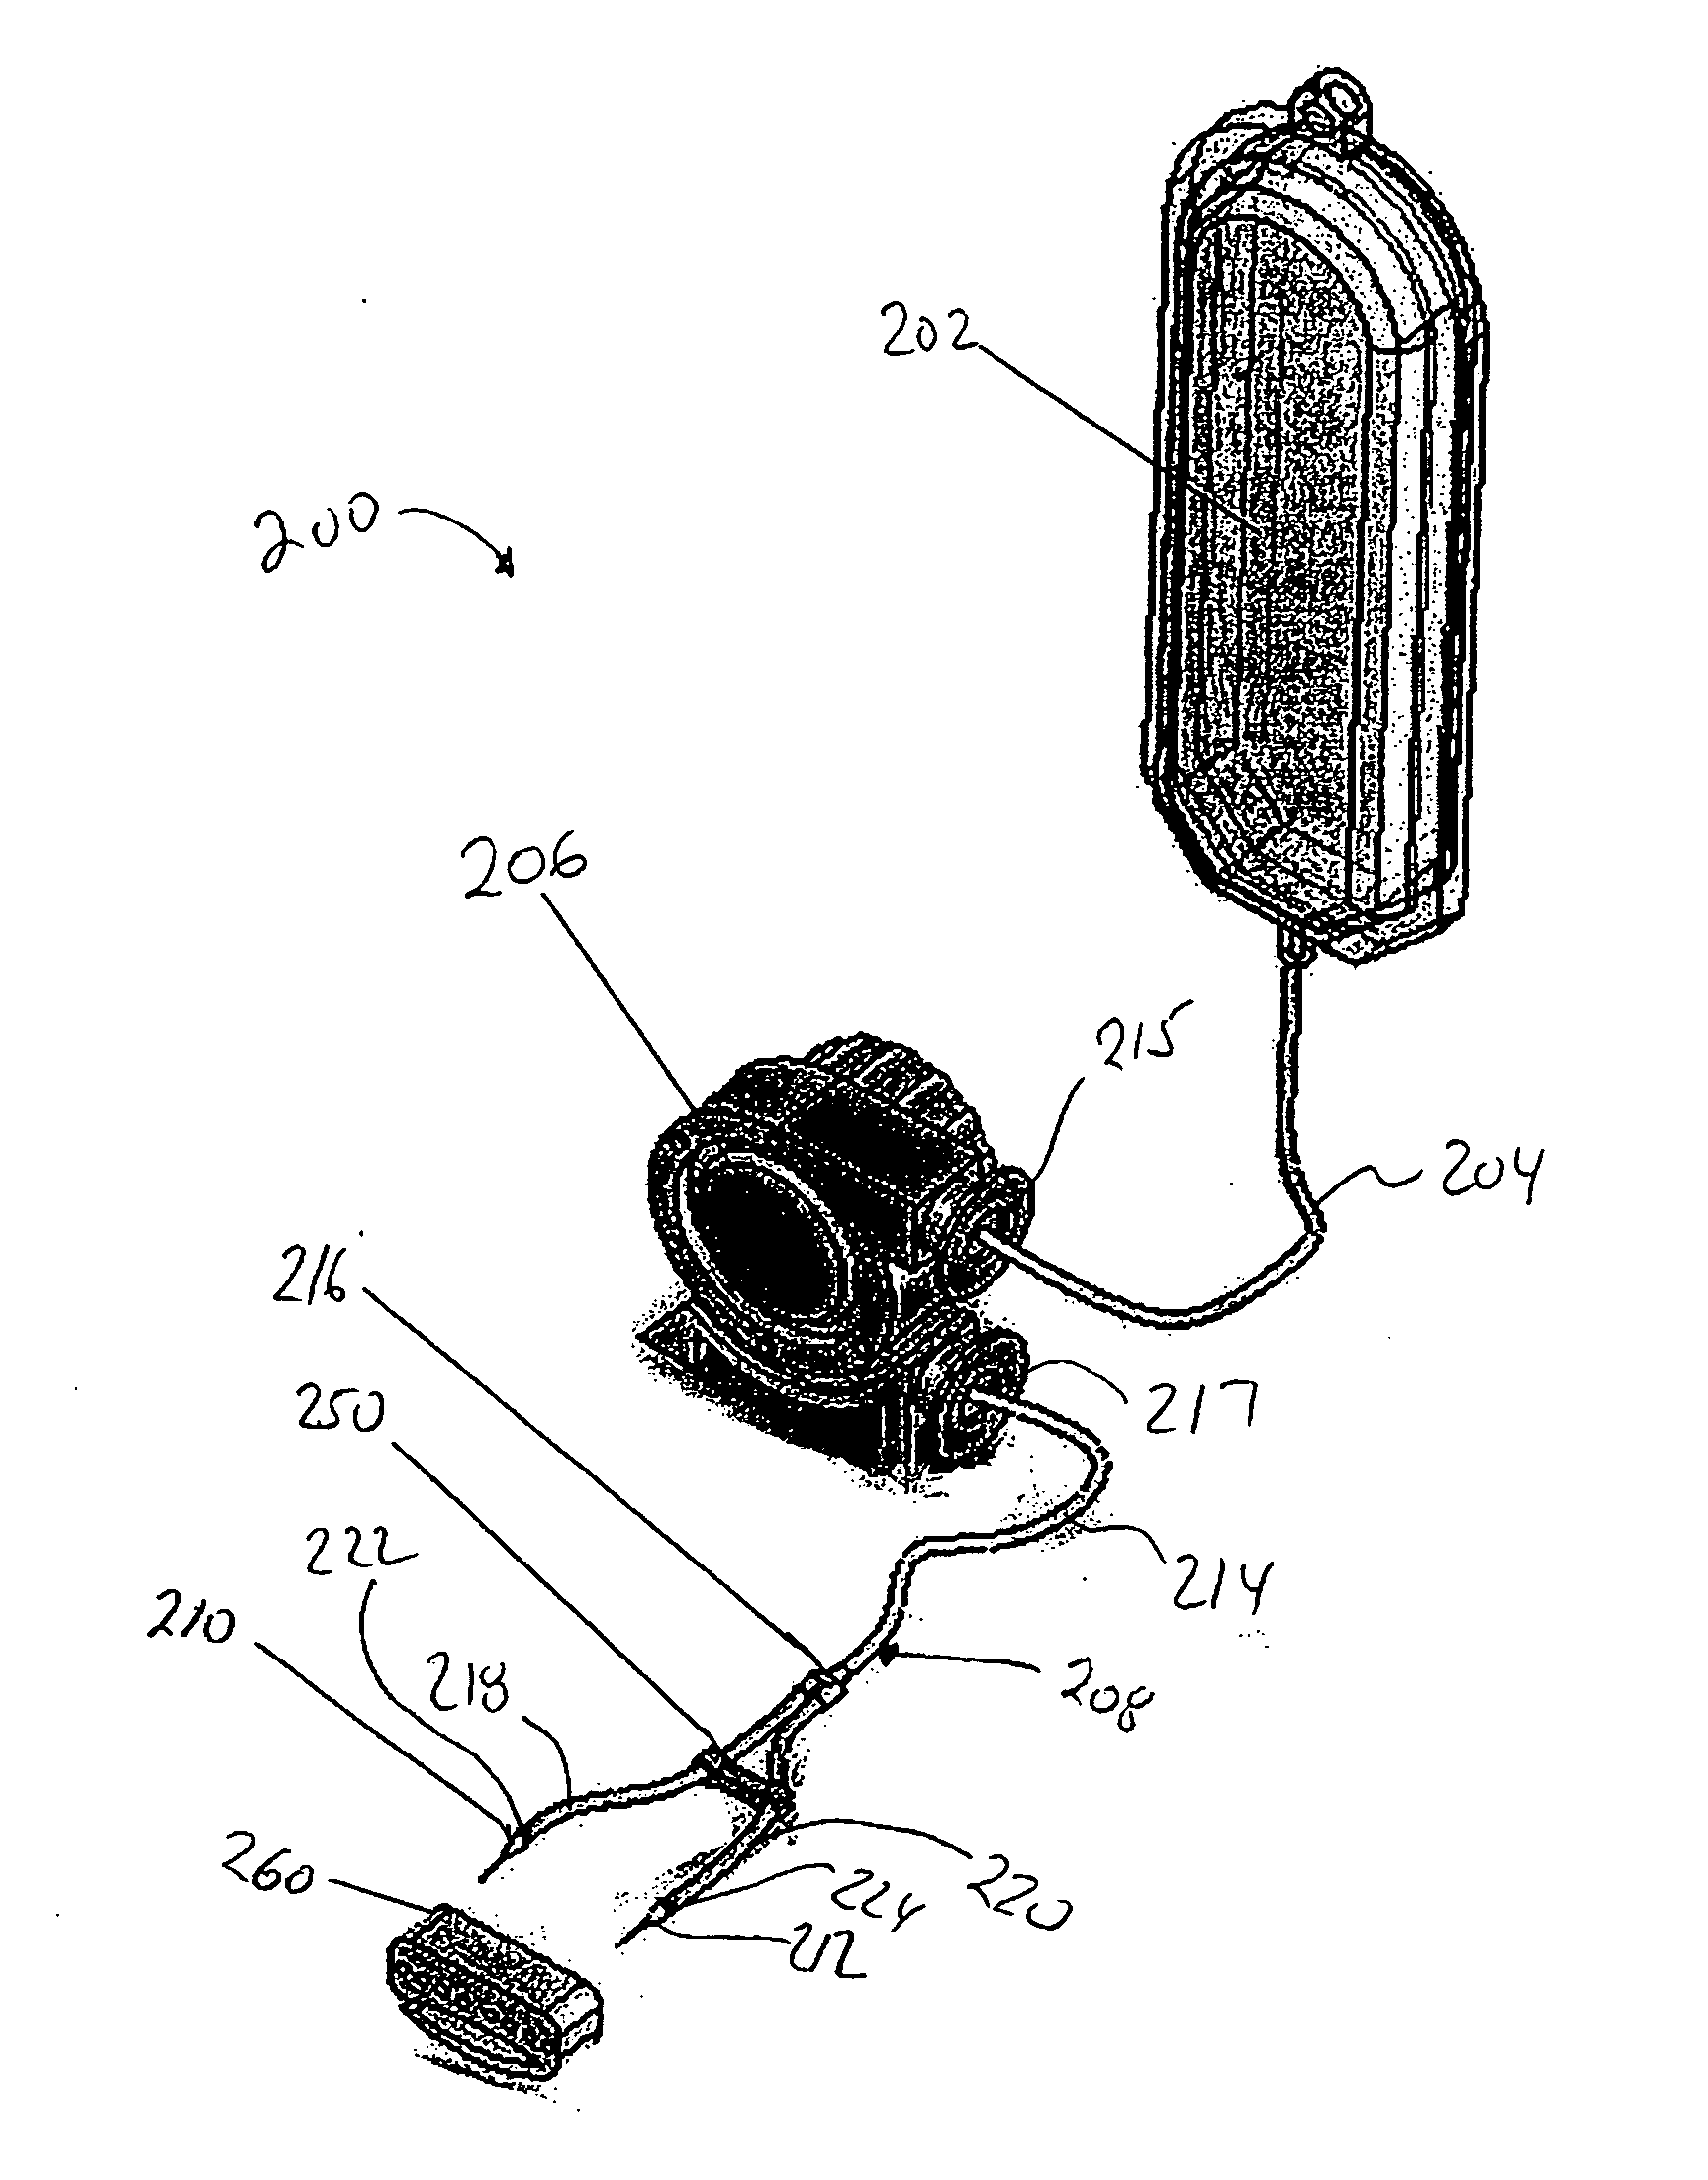 Apparatus and methods for treating undesired veins